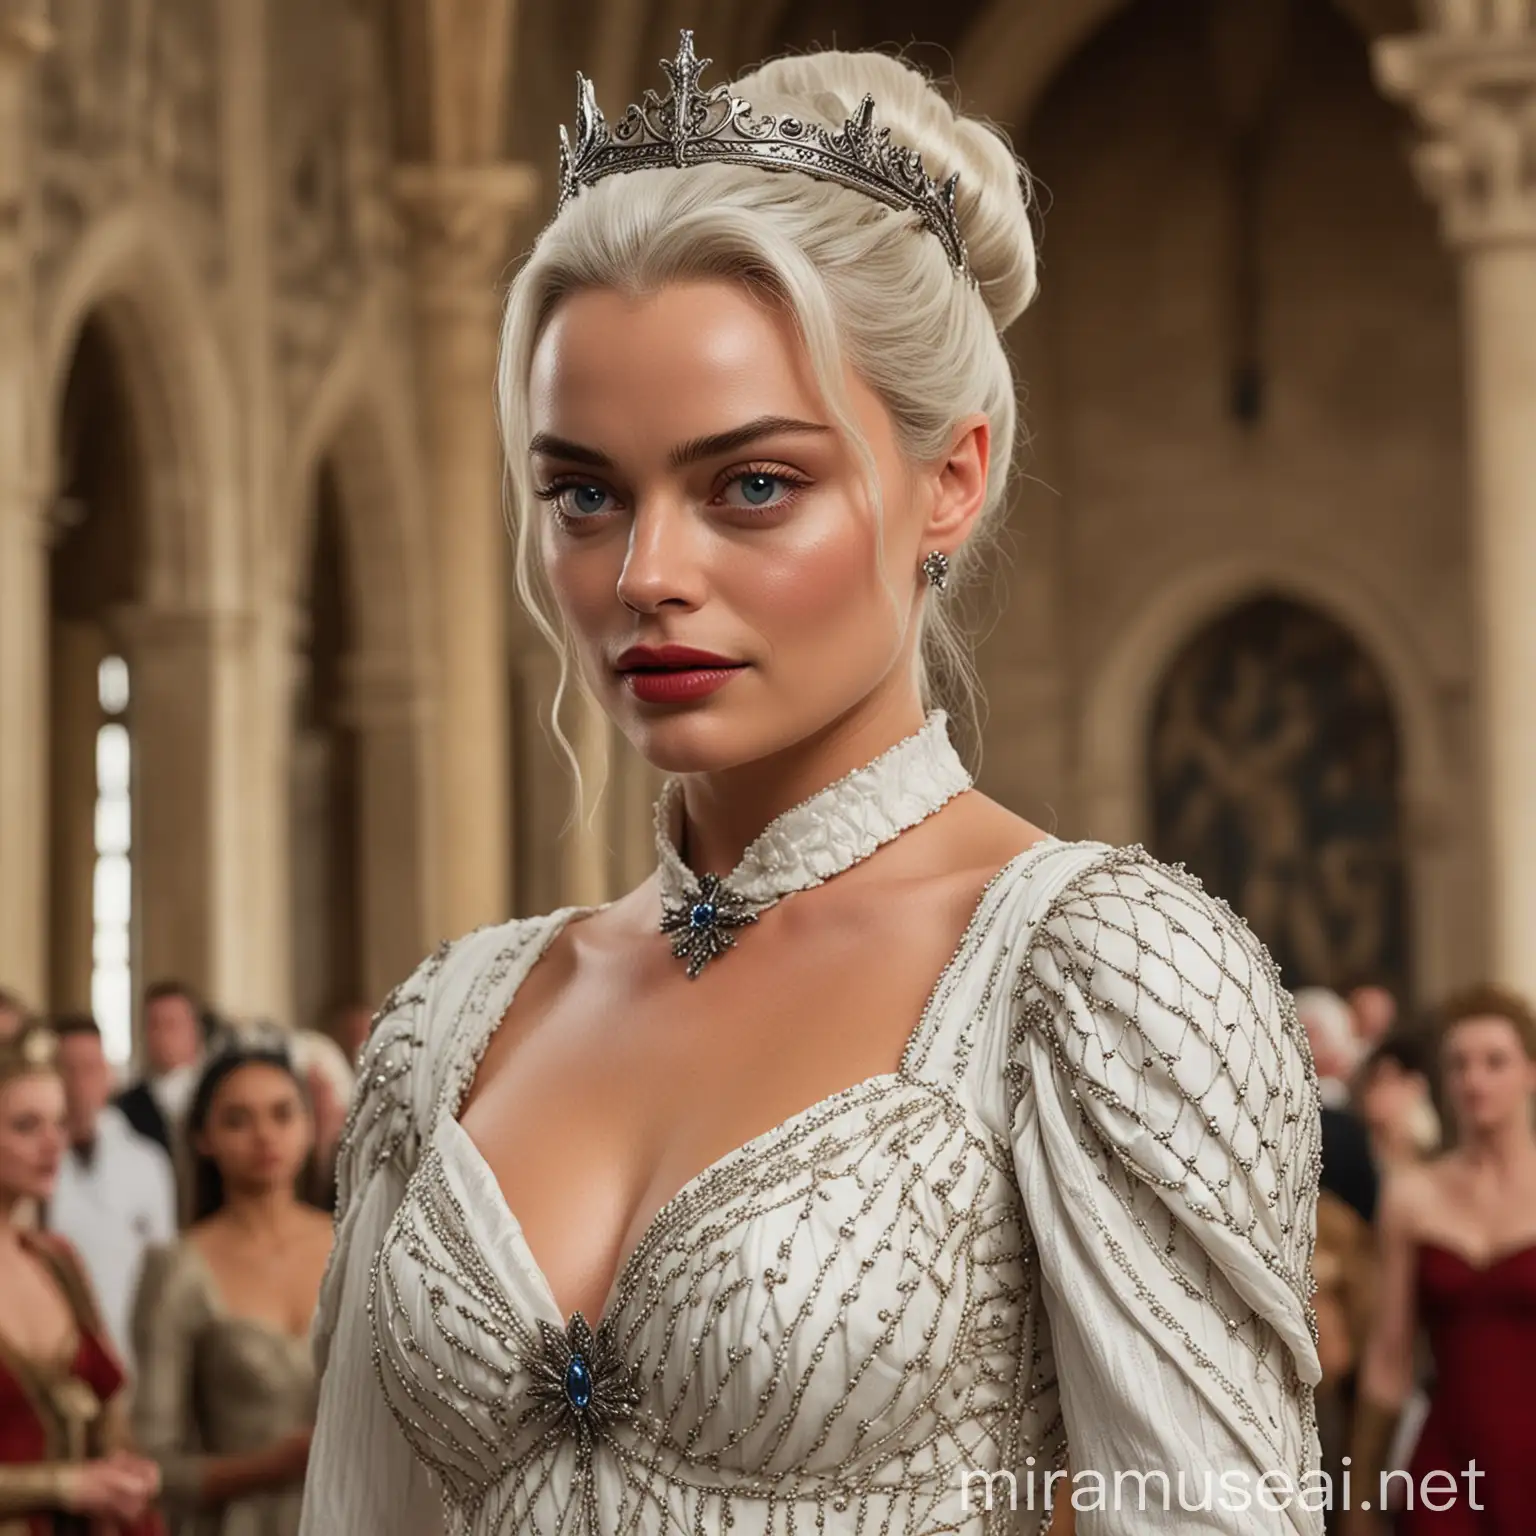 Princess Margot Robbie Dancing in DragonThemed Gown